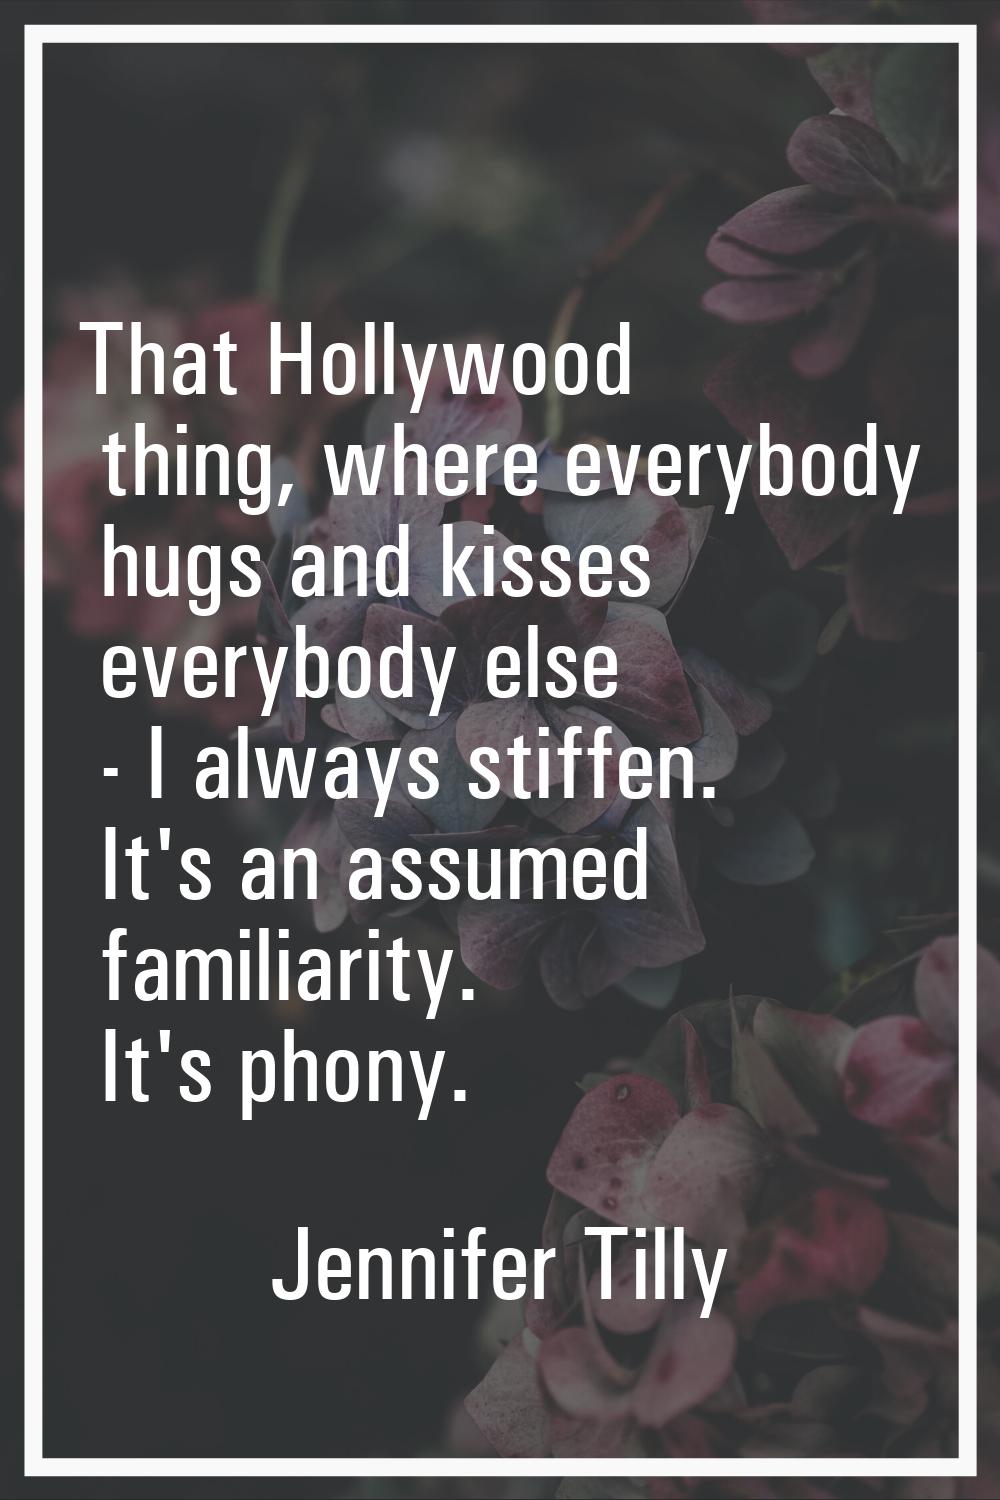 That Hollywood thing, where everybody hugs and kisses everybody else - I always stiffen. It's an as